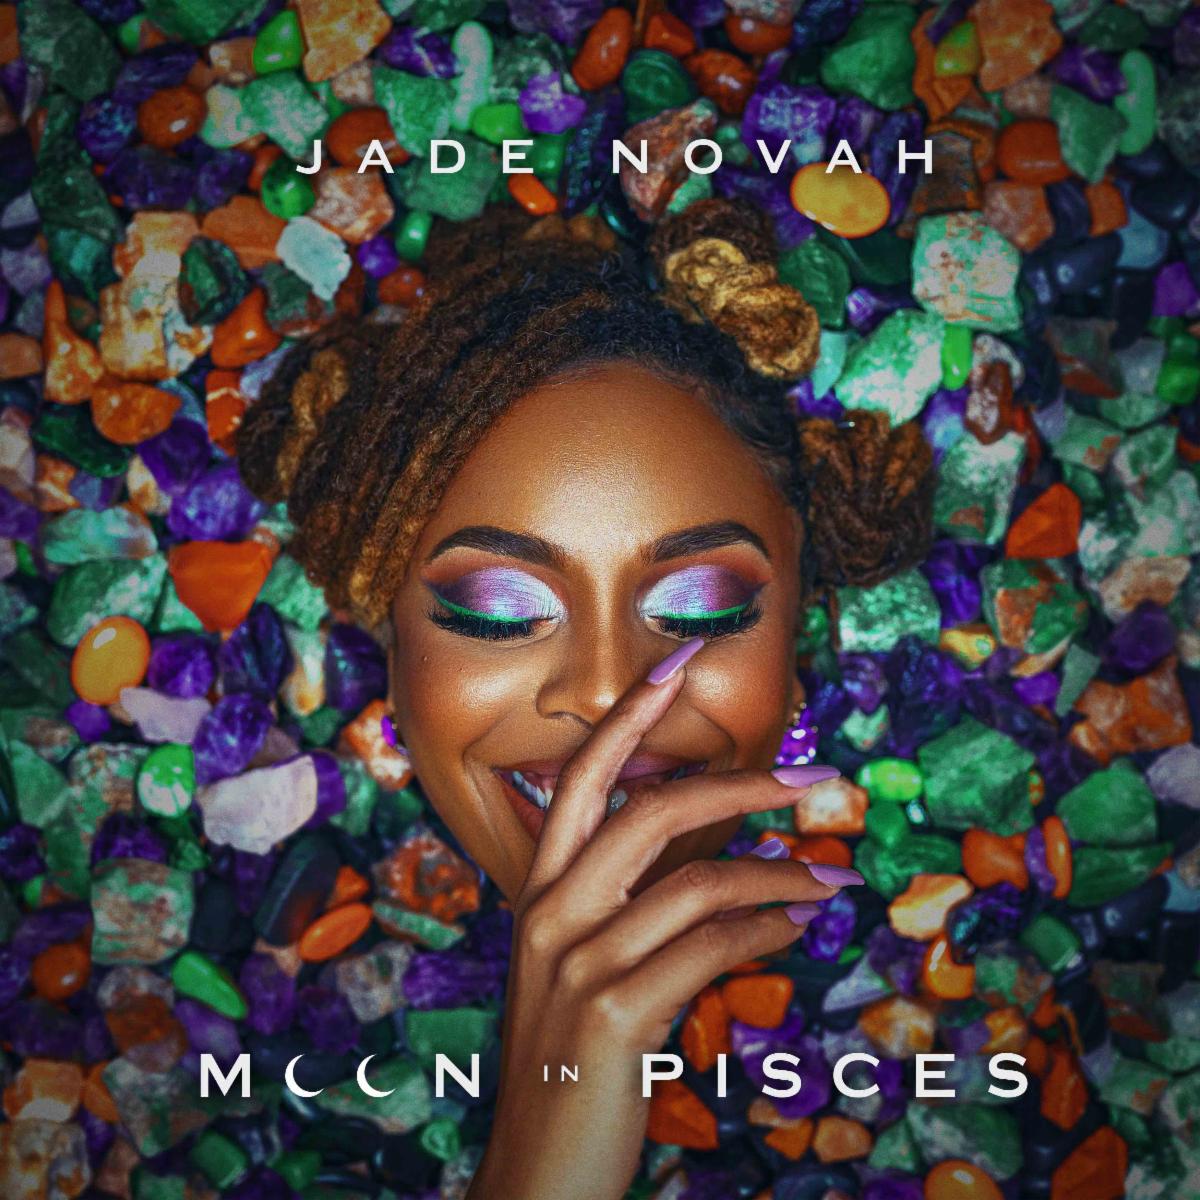 Jade Novah Releases New EP "Moon In the Pisces" (Stream)